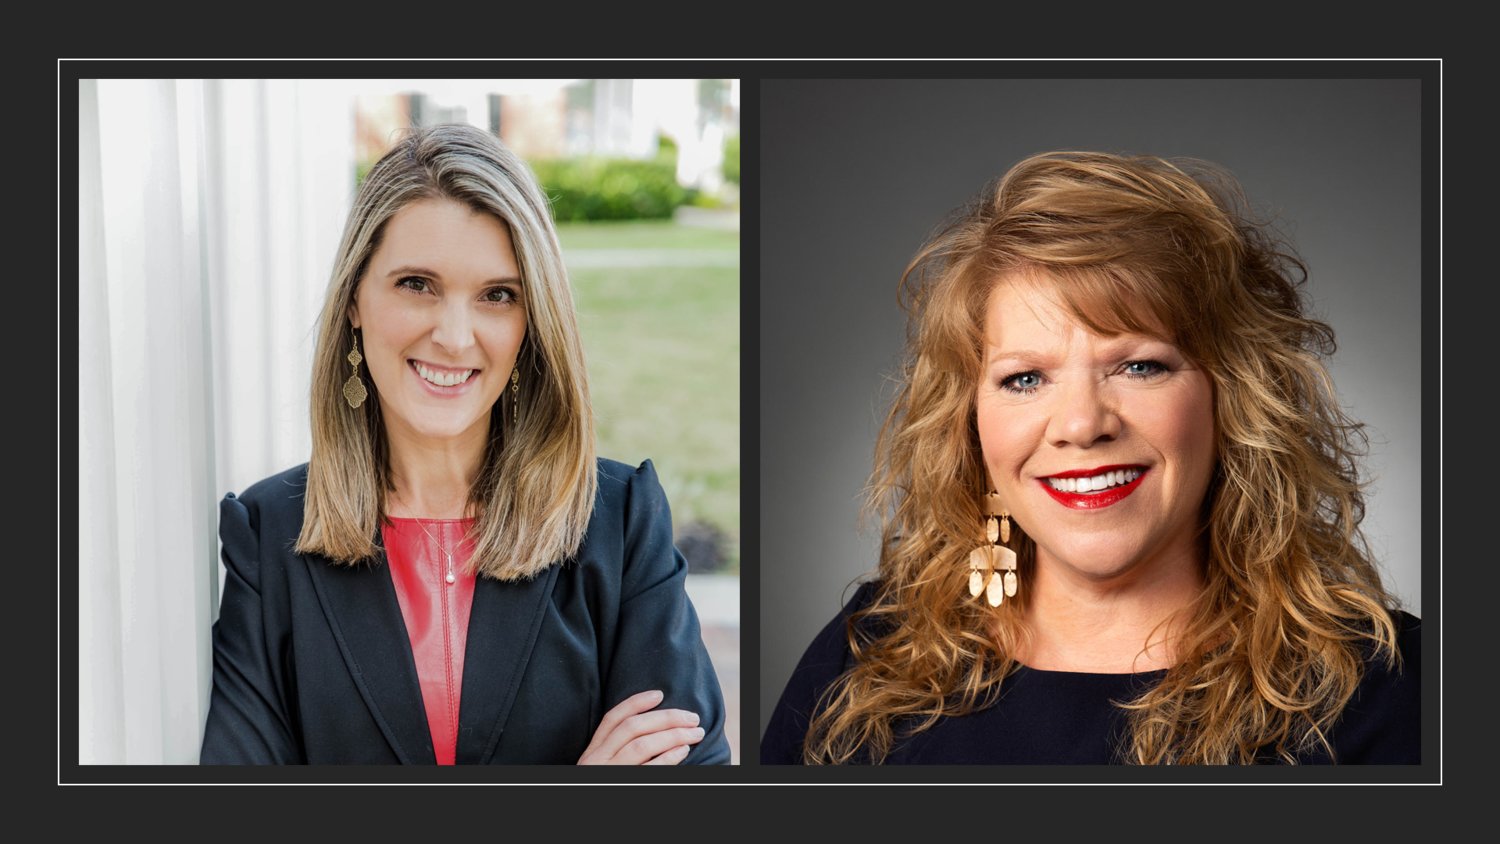 Gina Hicks (left) is facing incumbent Jenifer Stockdick for the Ward B Katy City Council seat. Both candidates are entrepreneurs and have a history of being active in the community.